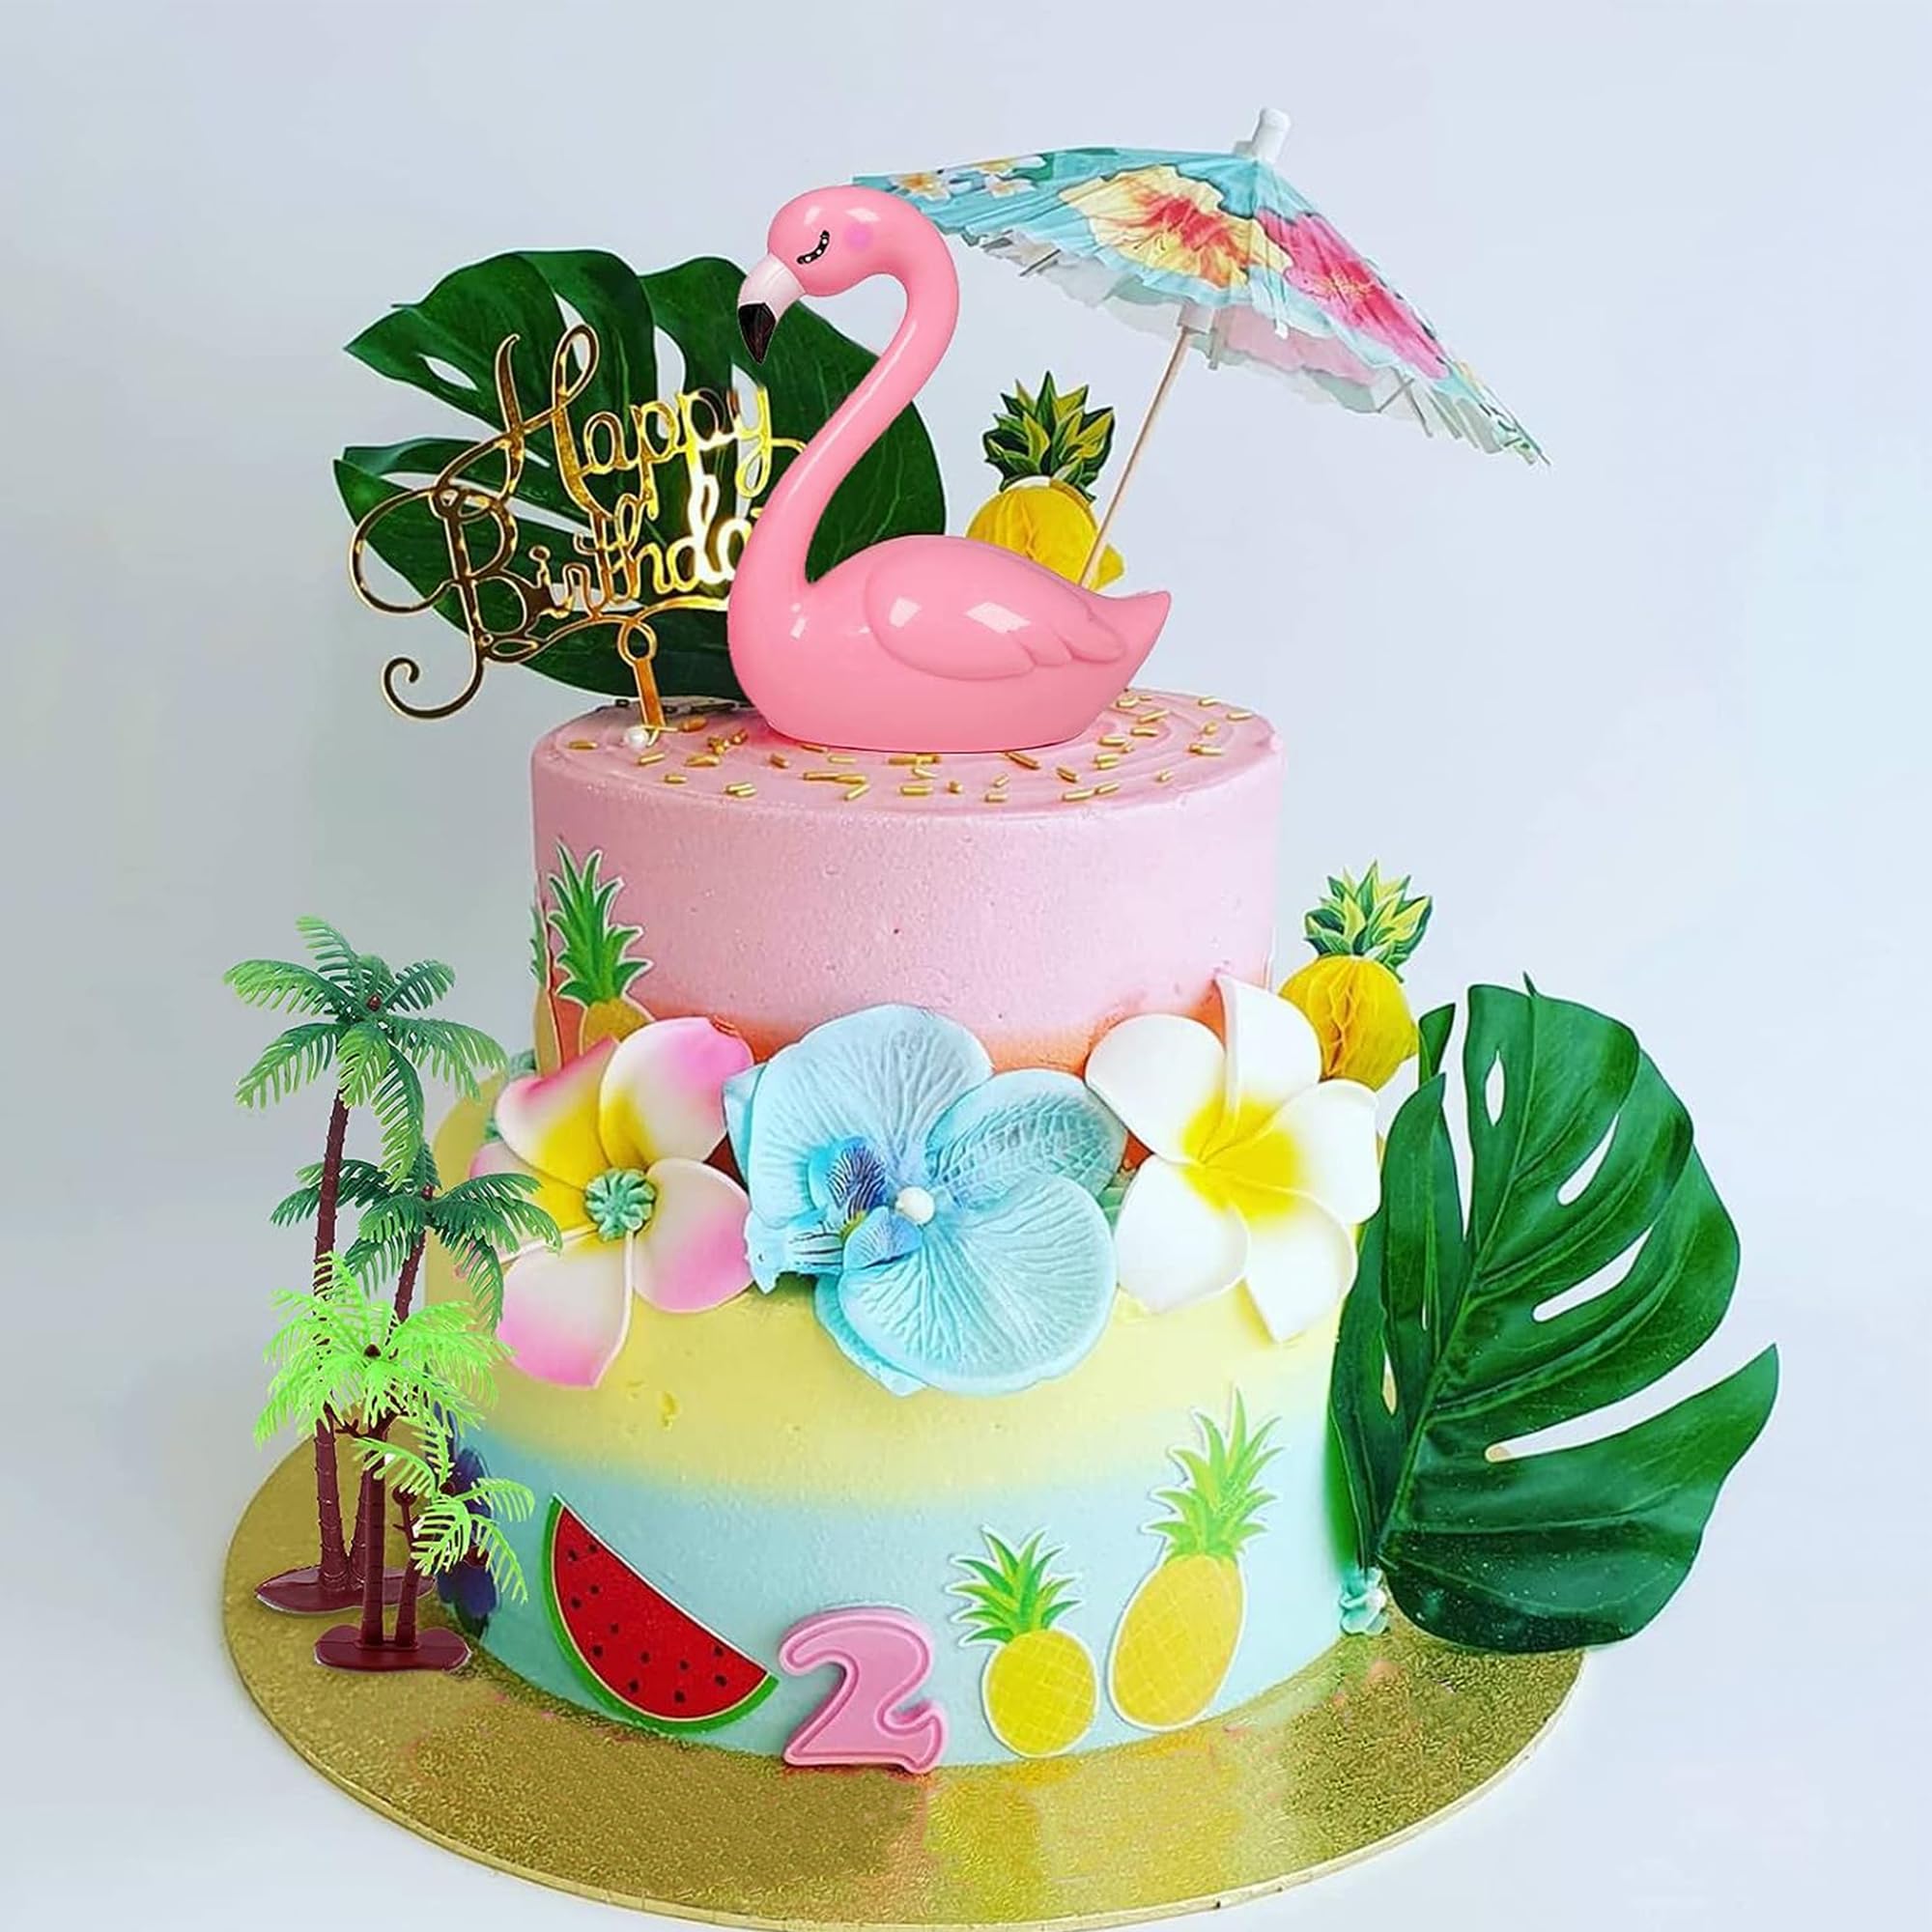 Flamingo Cake Toppers Artificial Flower Palm Leaves Cake Decoration for Birthday Summer Tropical Hawaiian Themed Party Supplies (Two Flamingo)